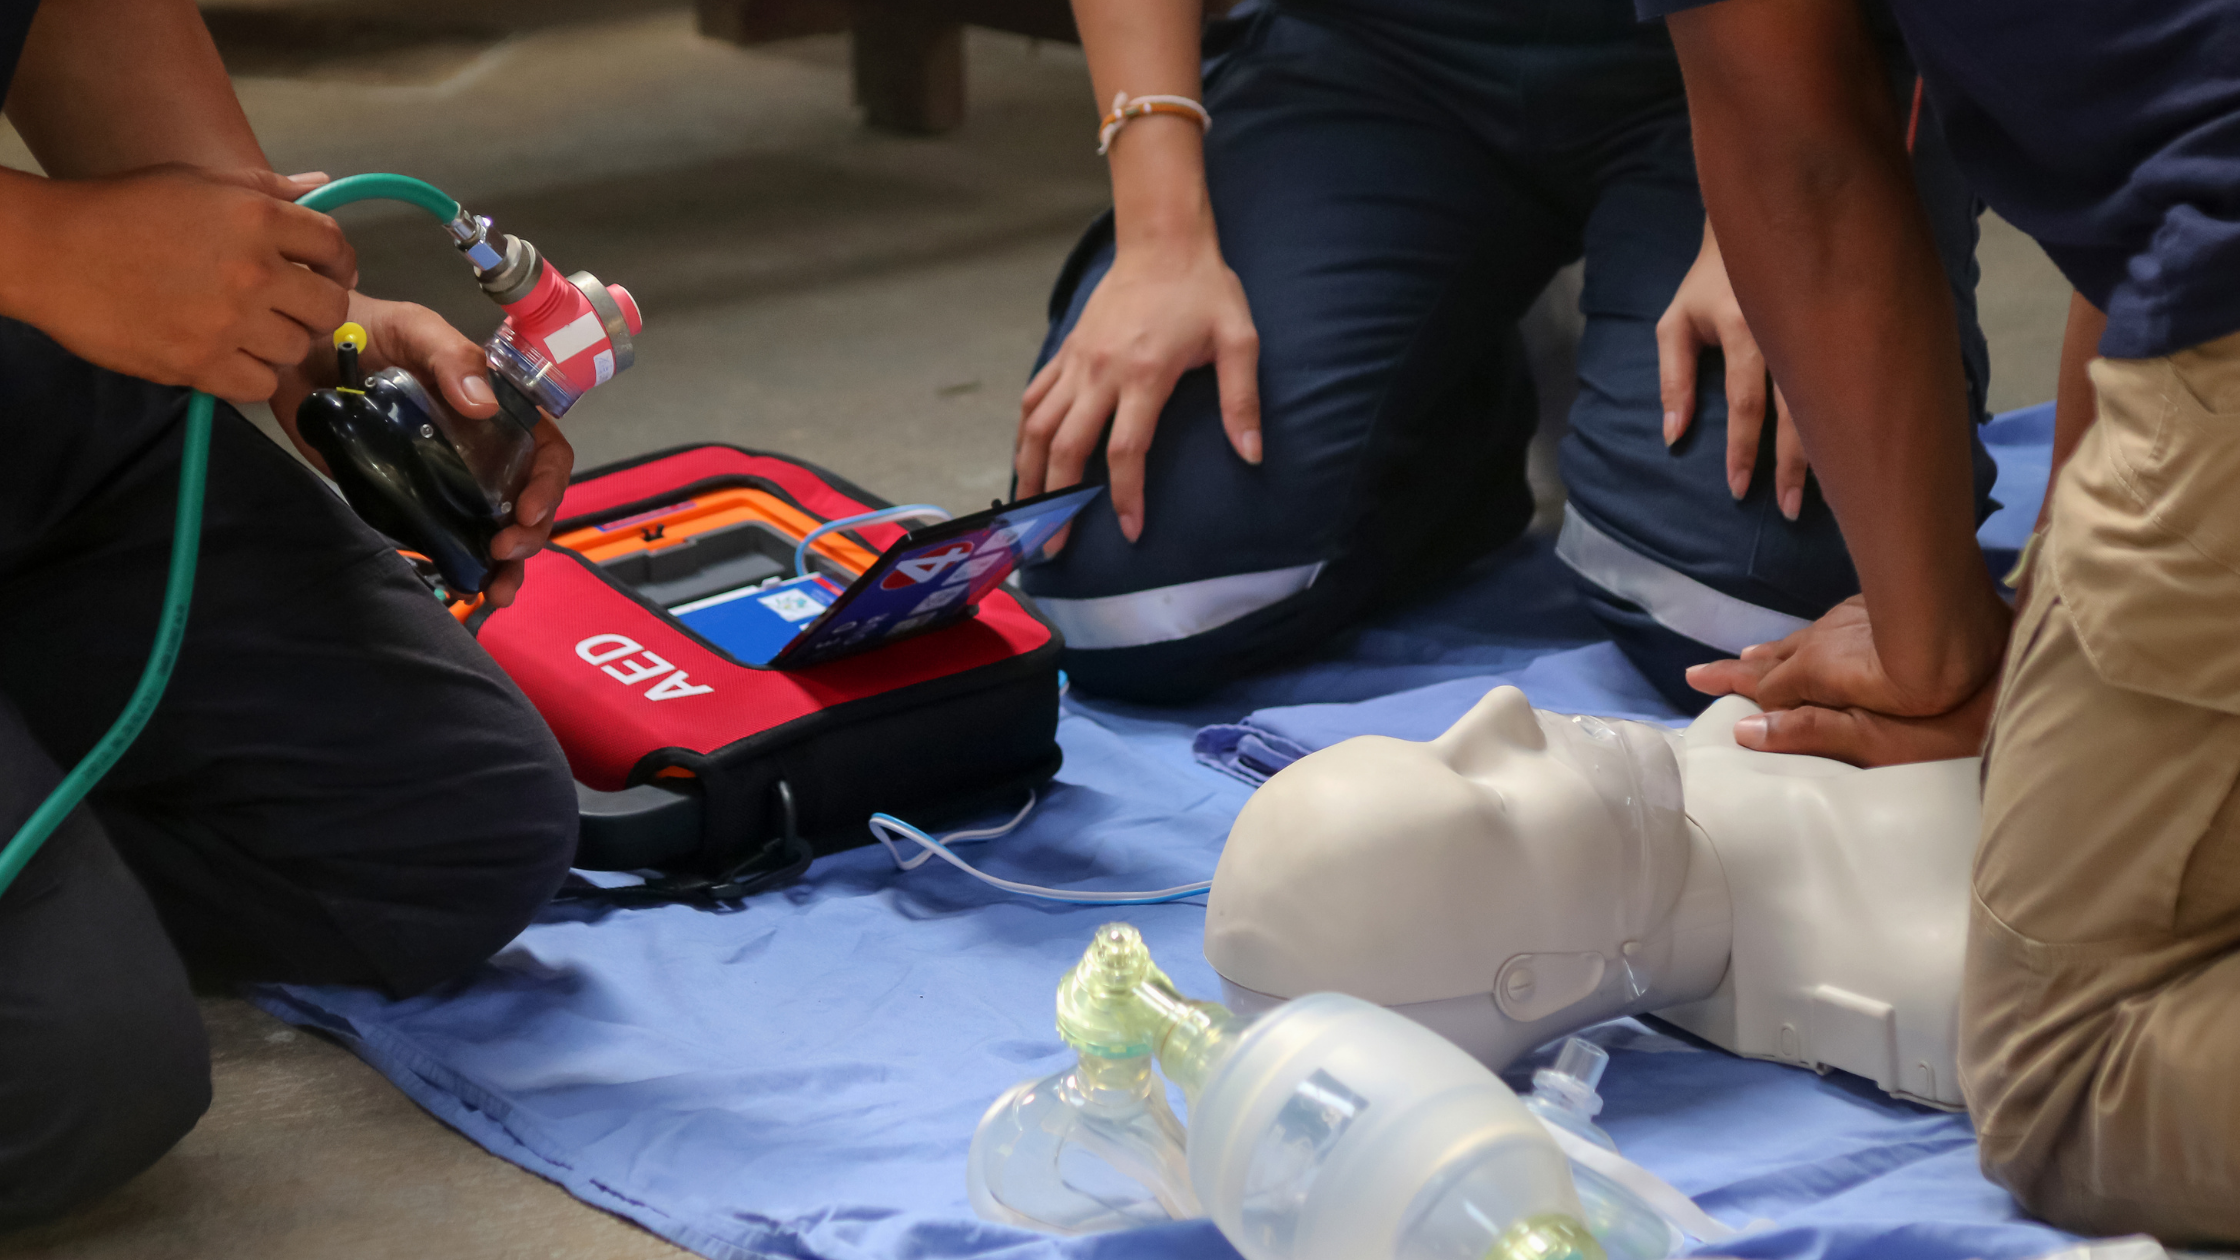 Victoria Standard First-Aid Course CPR 